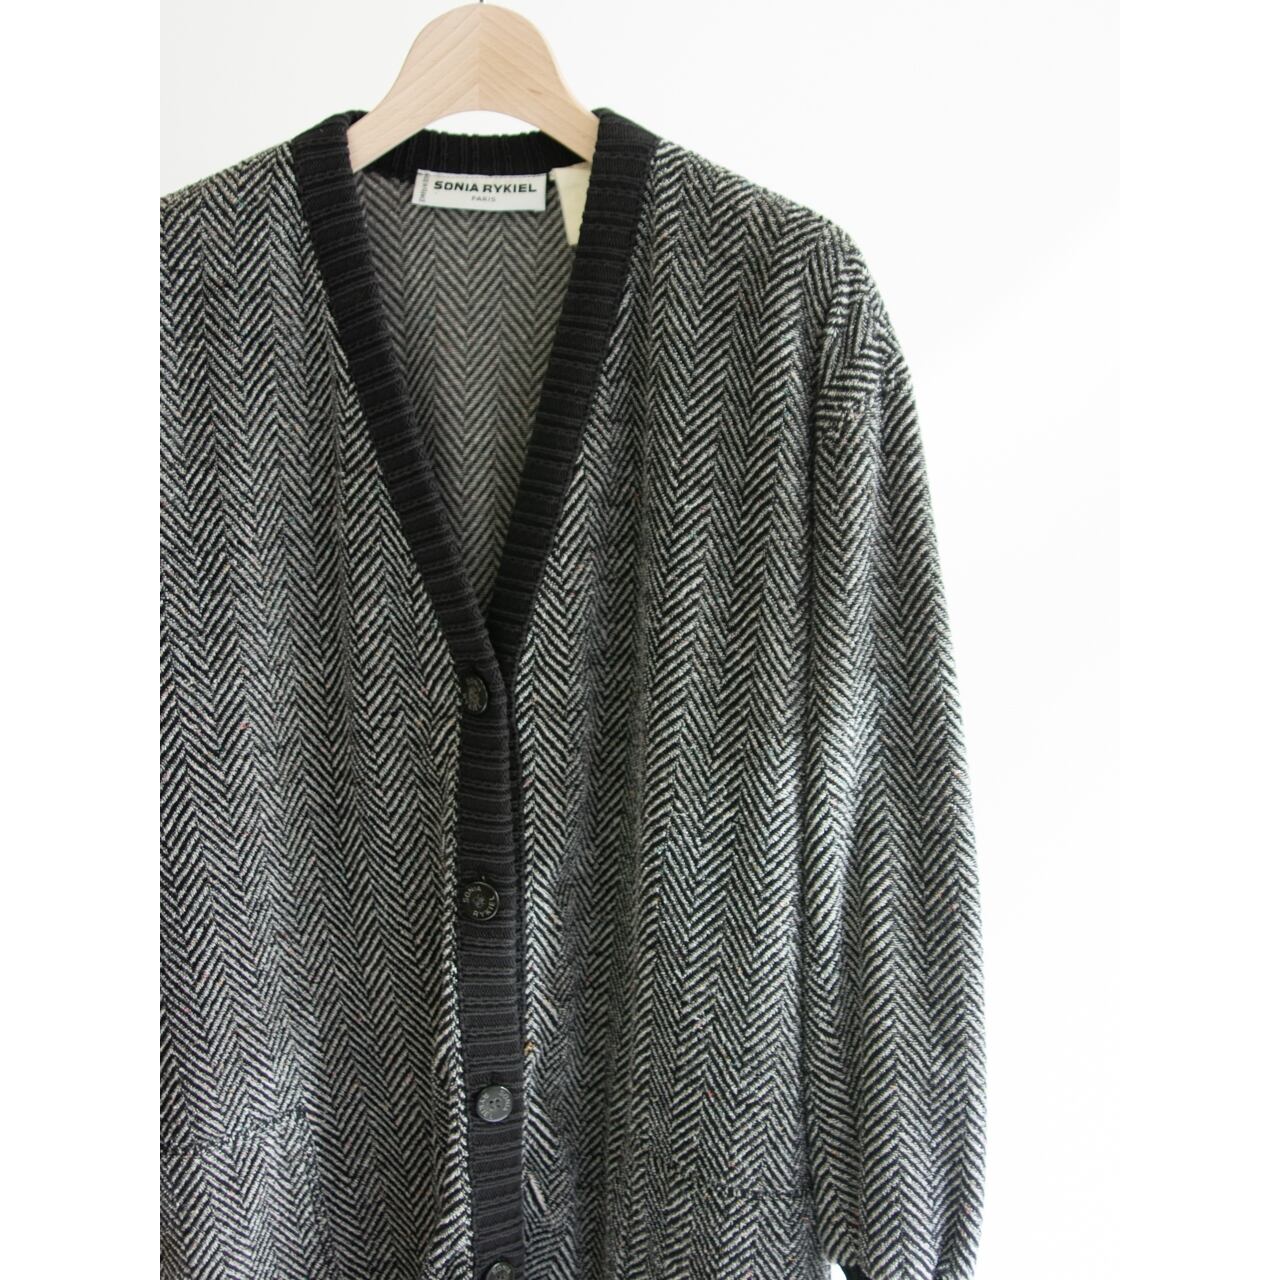 SONIA RYKIEL】Made in France Cotton-Polyester Cardigan（ソニア ...